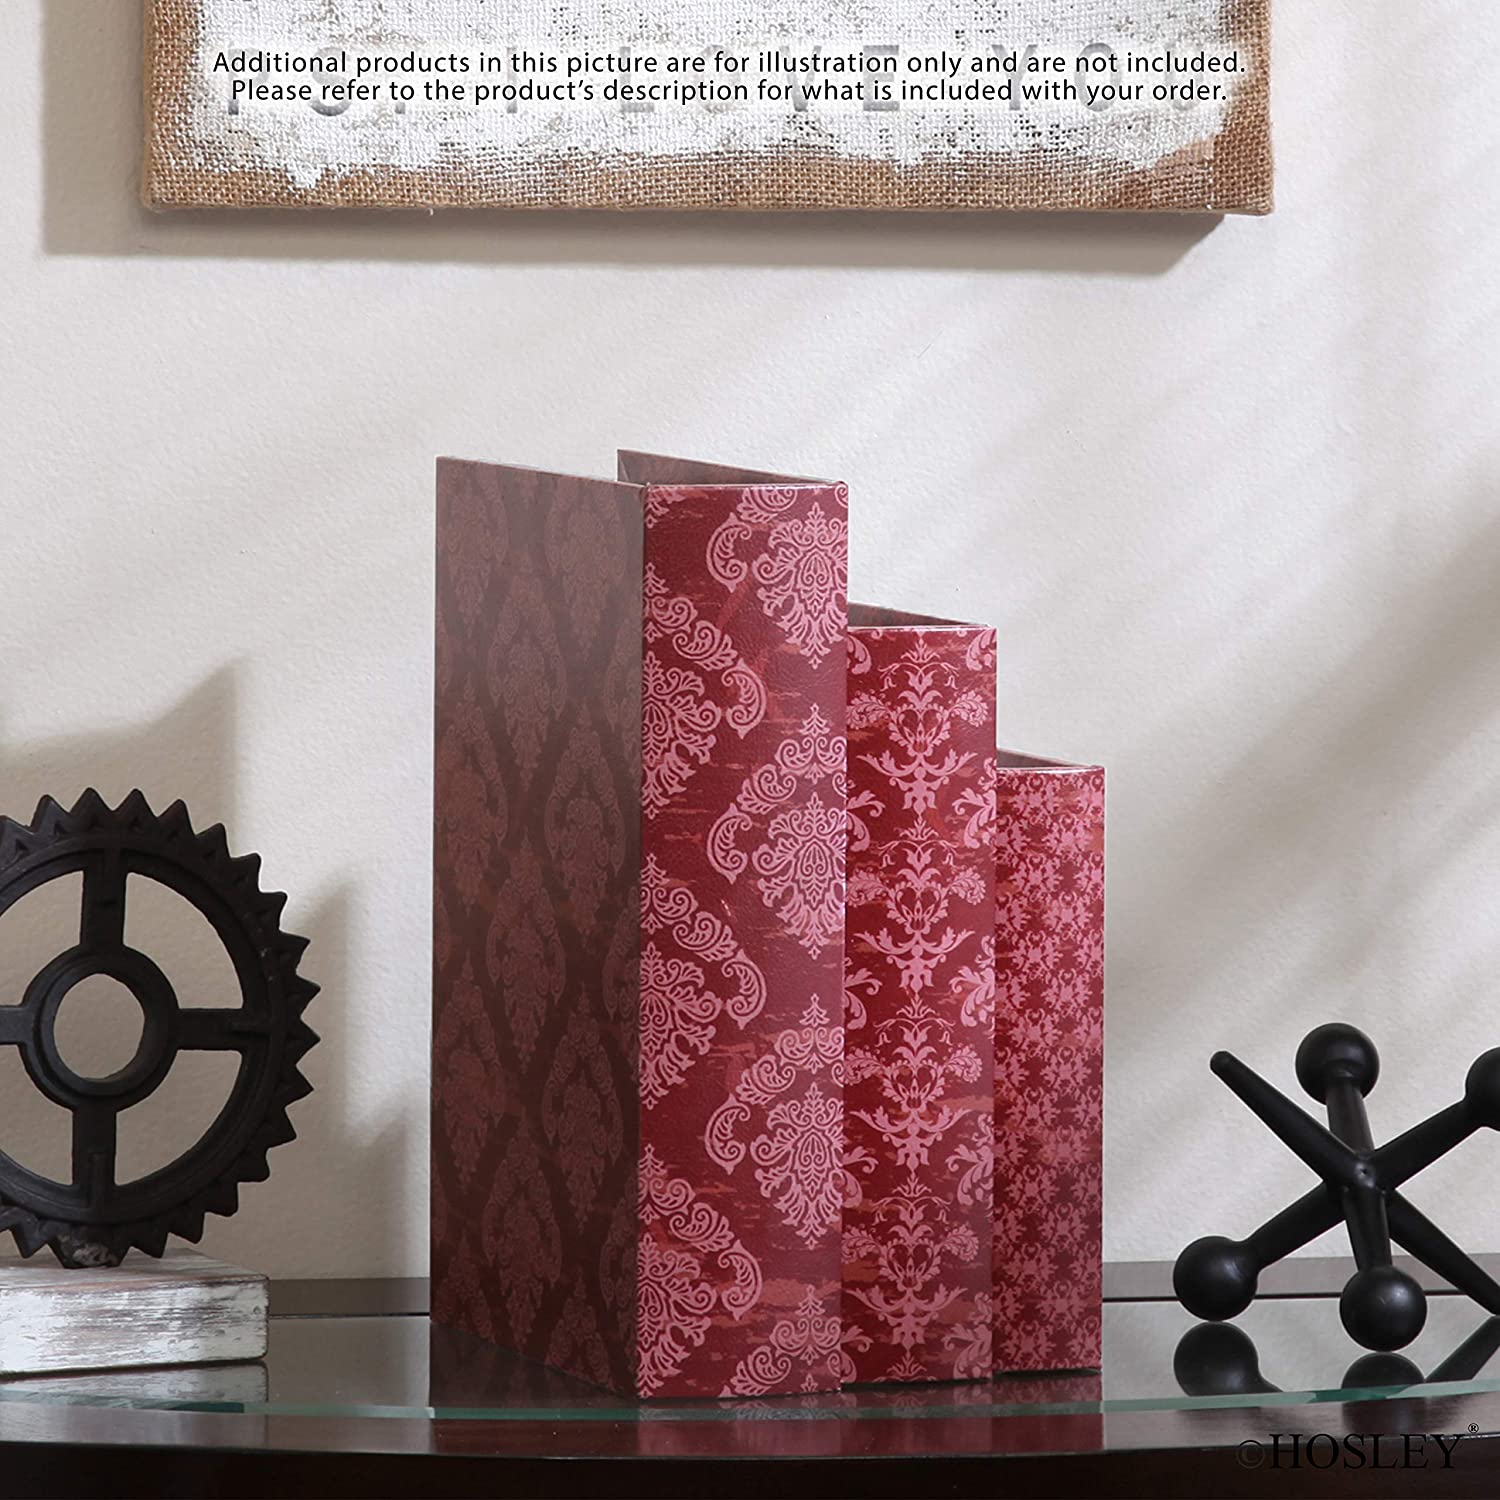 Hosley Home Wooden Storage Farmhouse Memory Book Boxes Set of 3, Red Brown & Gold Paisley - image 5 of 8